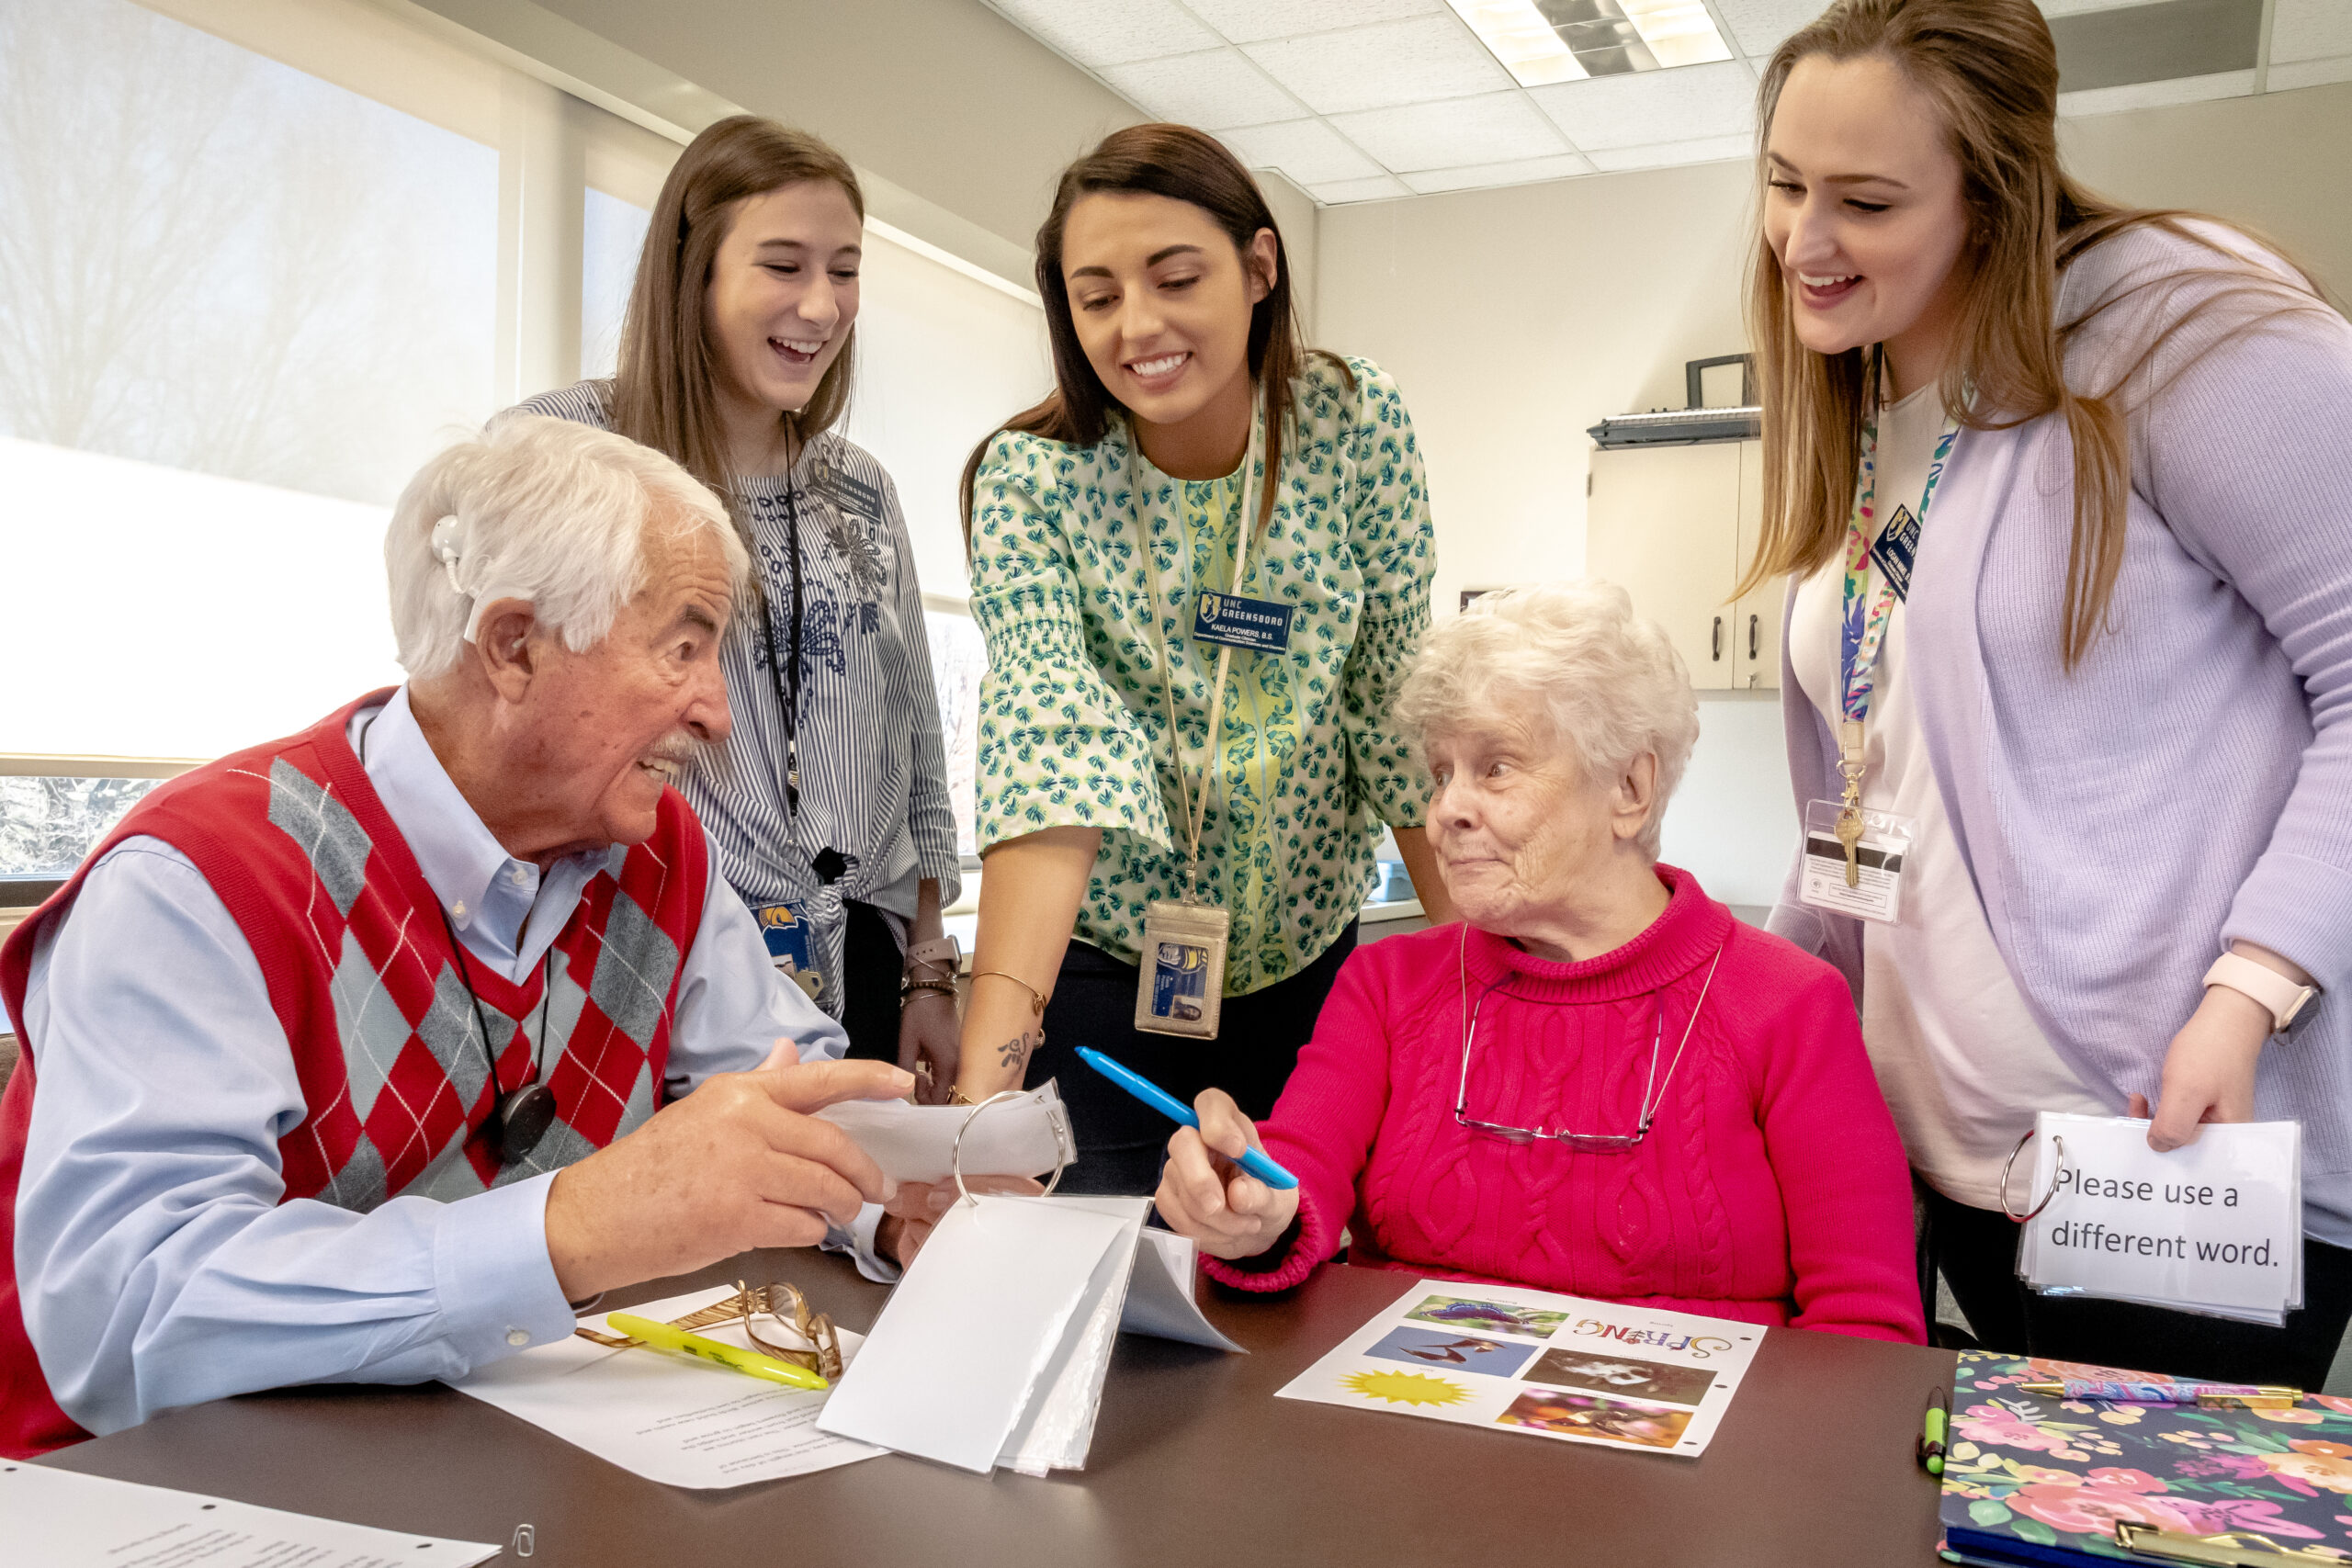 Students meet with senior citizens